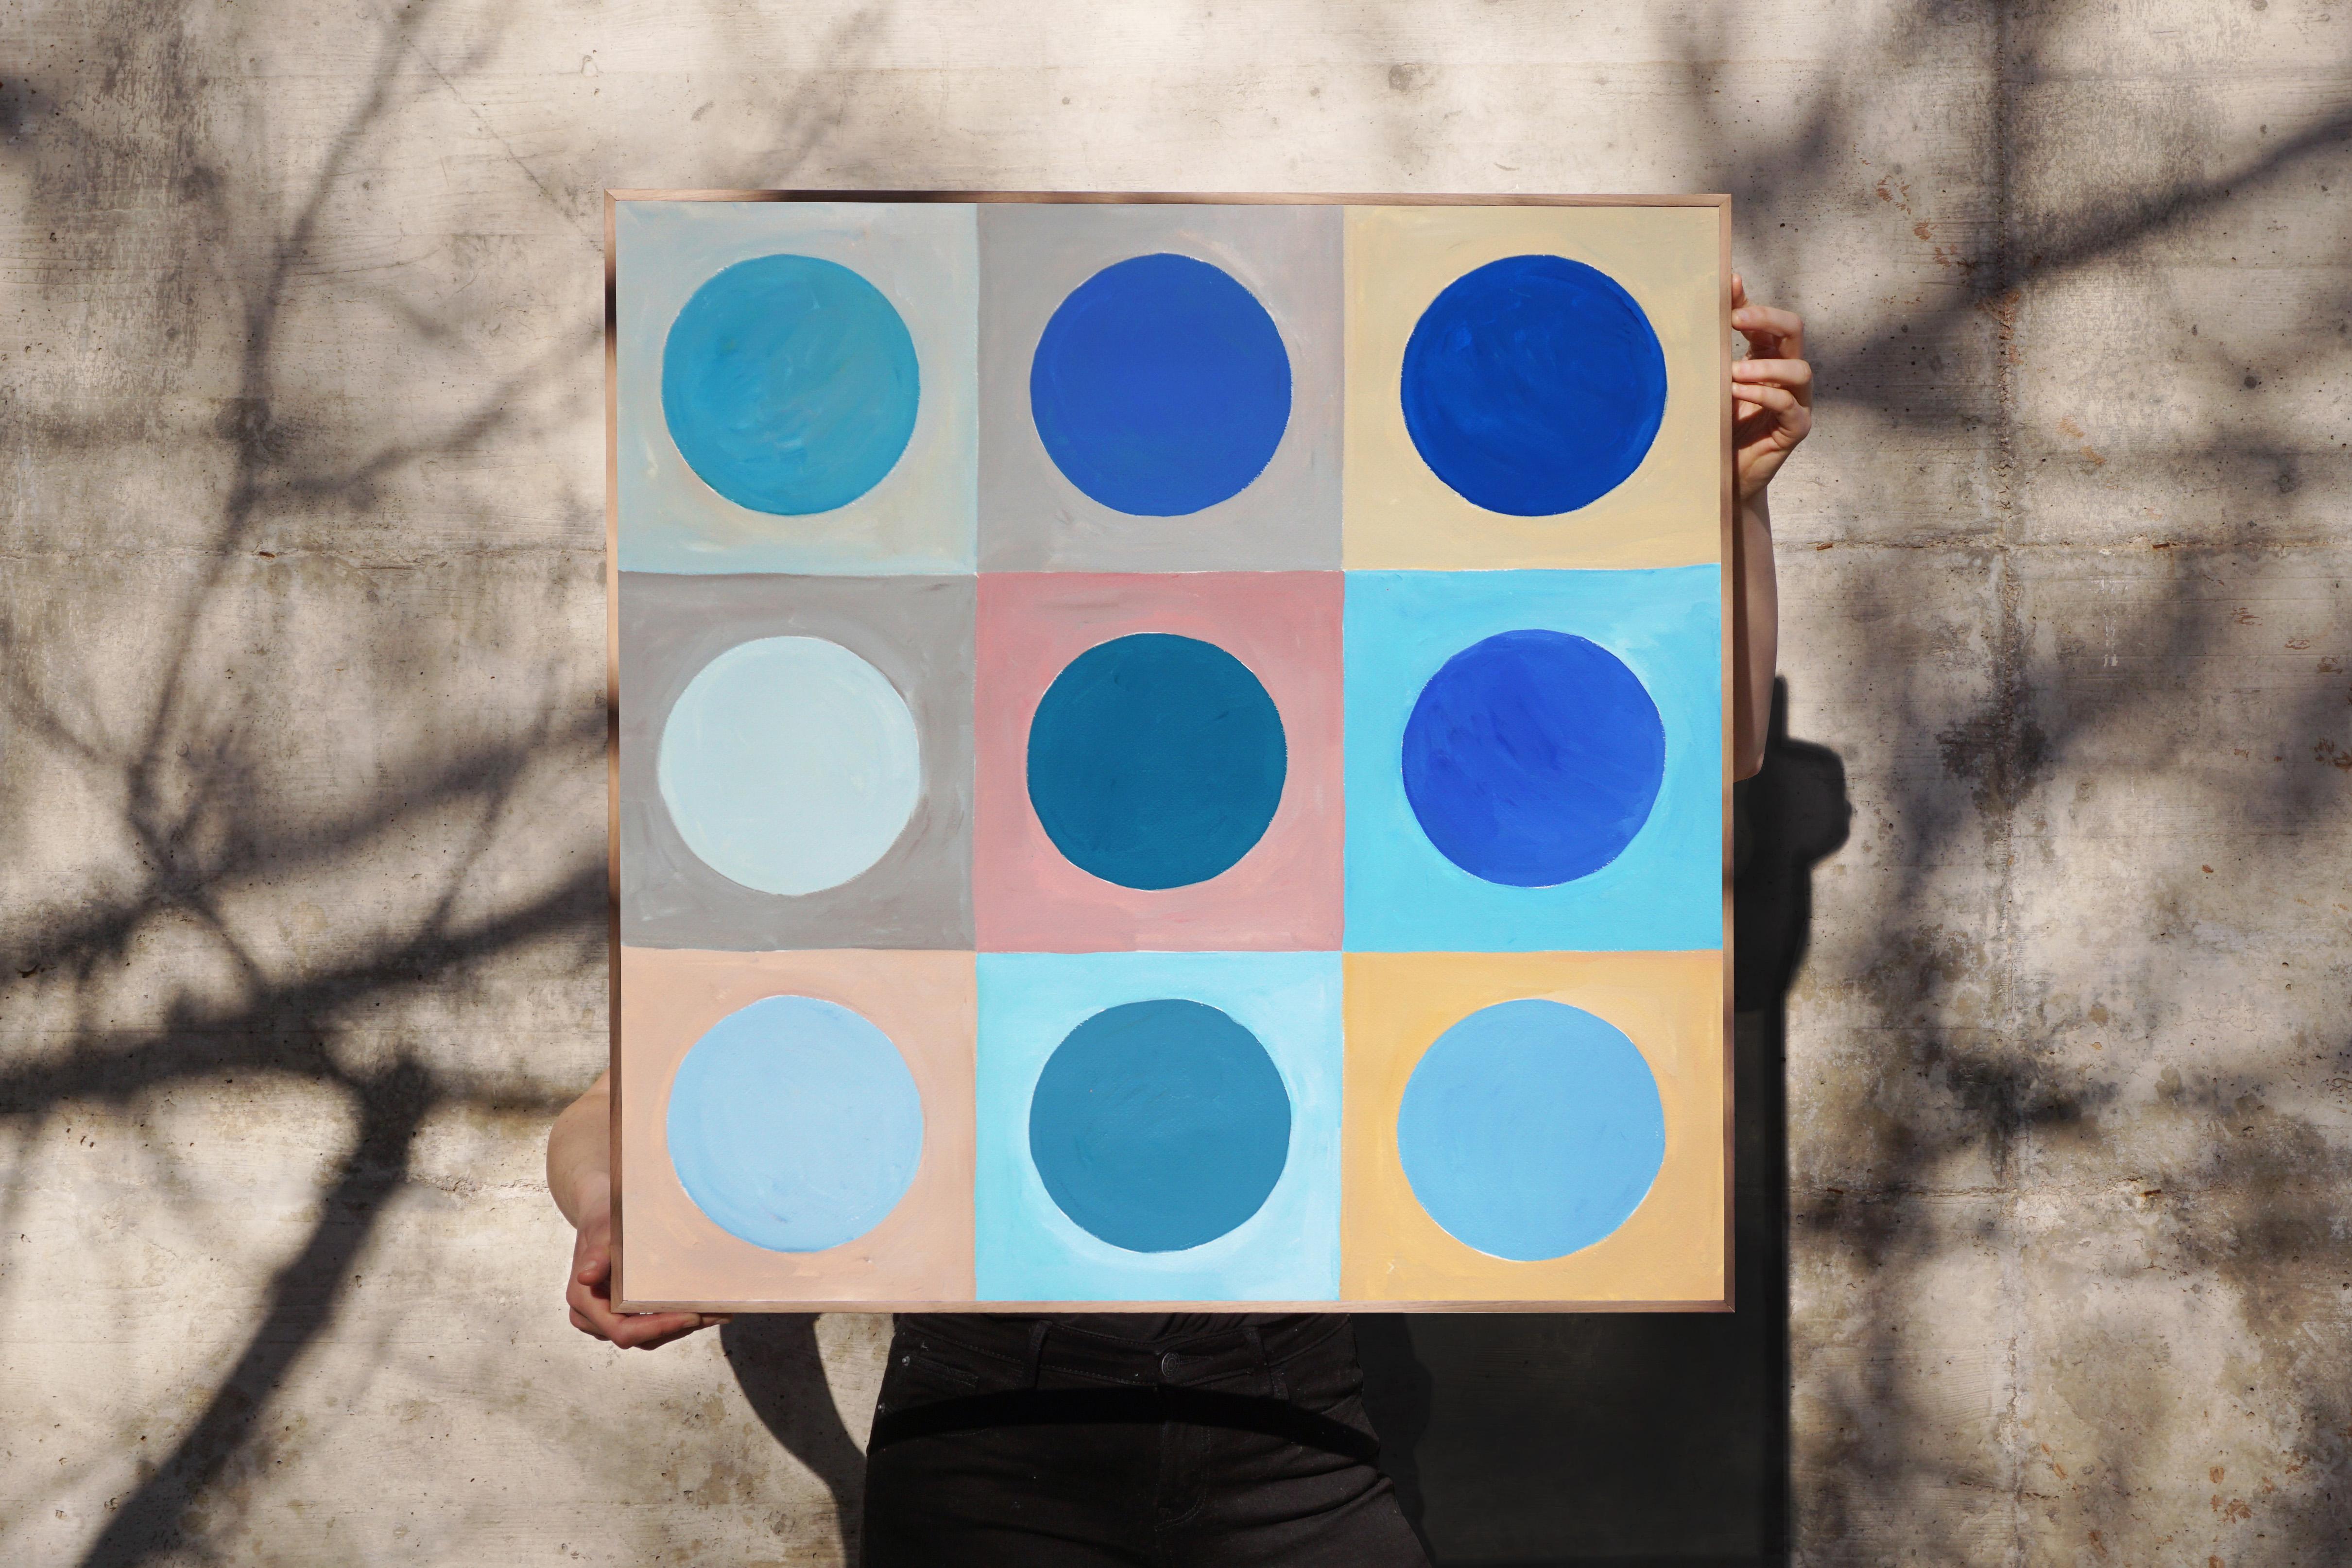 Moon in The Day Time Sky, Baby Blue, Gray, Pastel Tones, Checkers, Geometry Grid - Painting by Natalia Roman